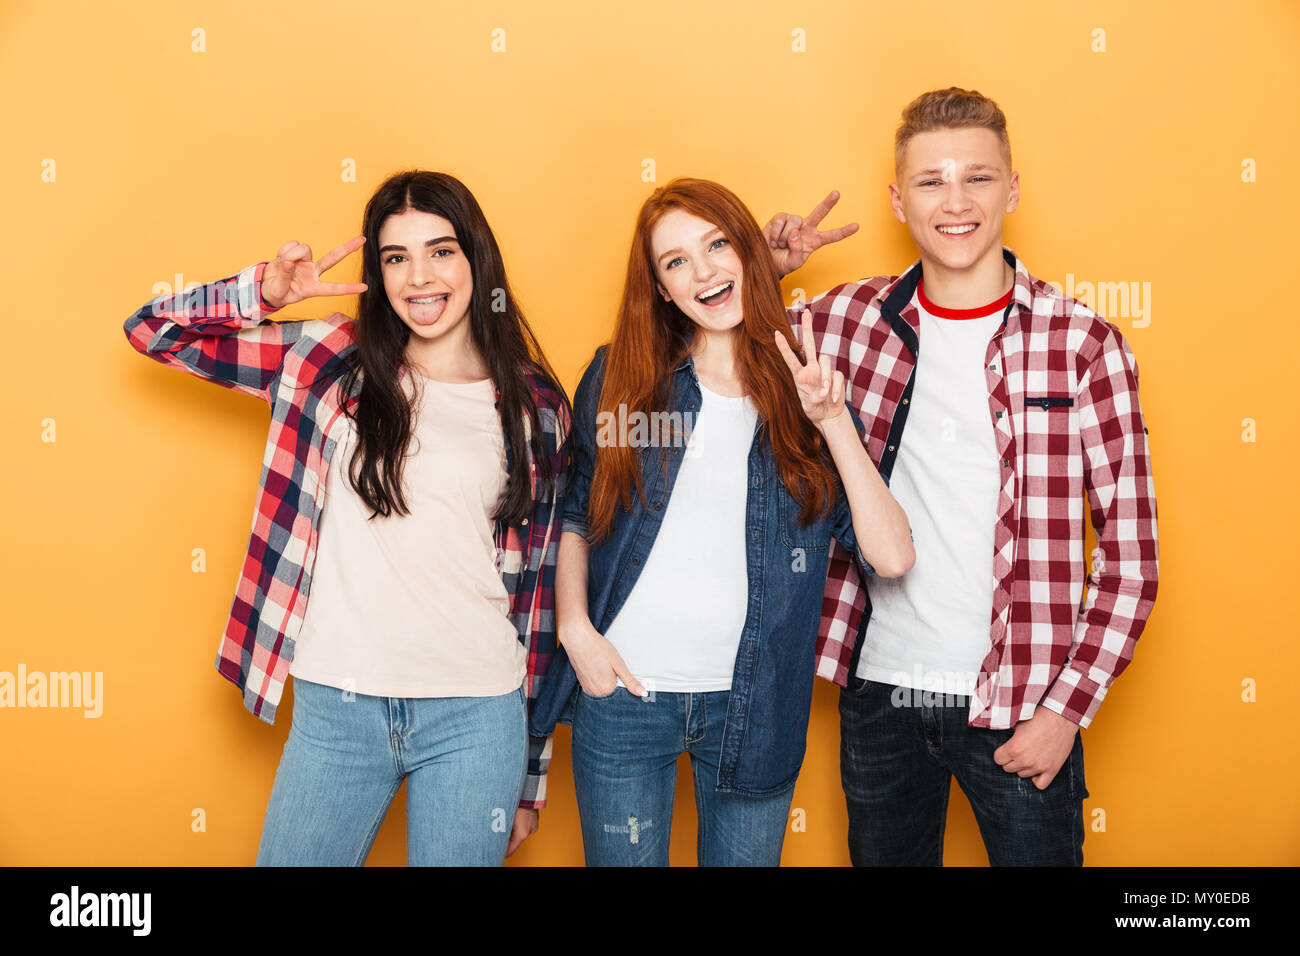 Group of happy school friends showing peace gesture while standing together and having fun over yellow background Stock Photo